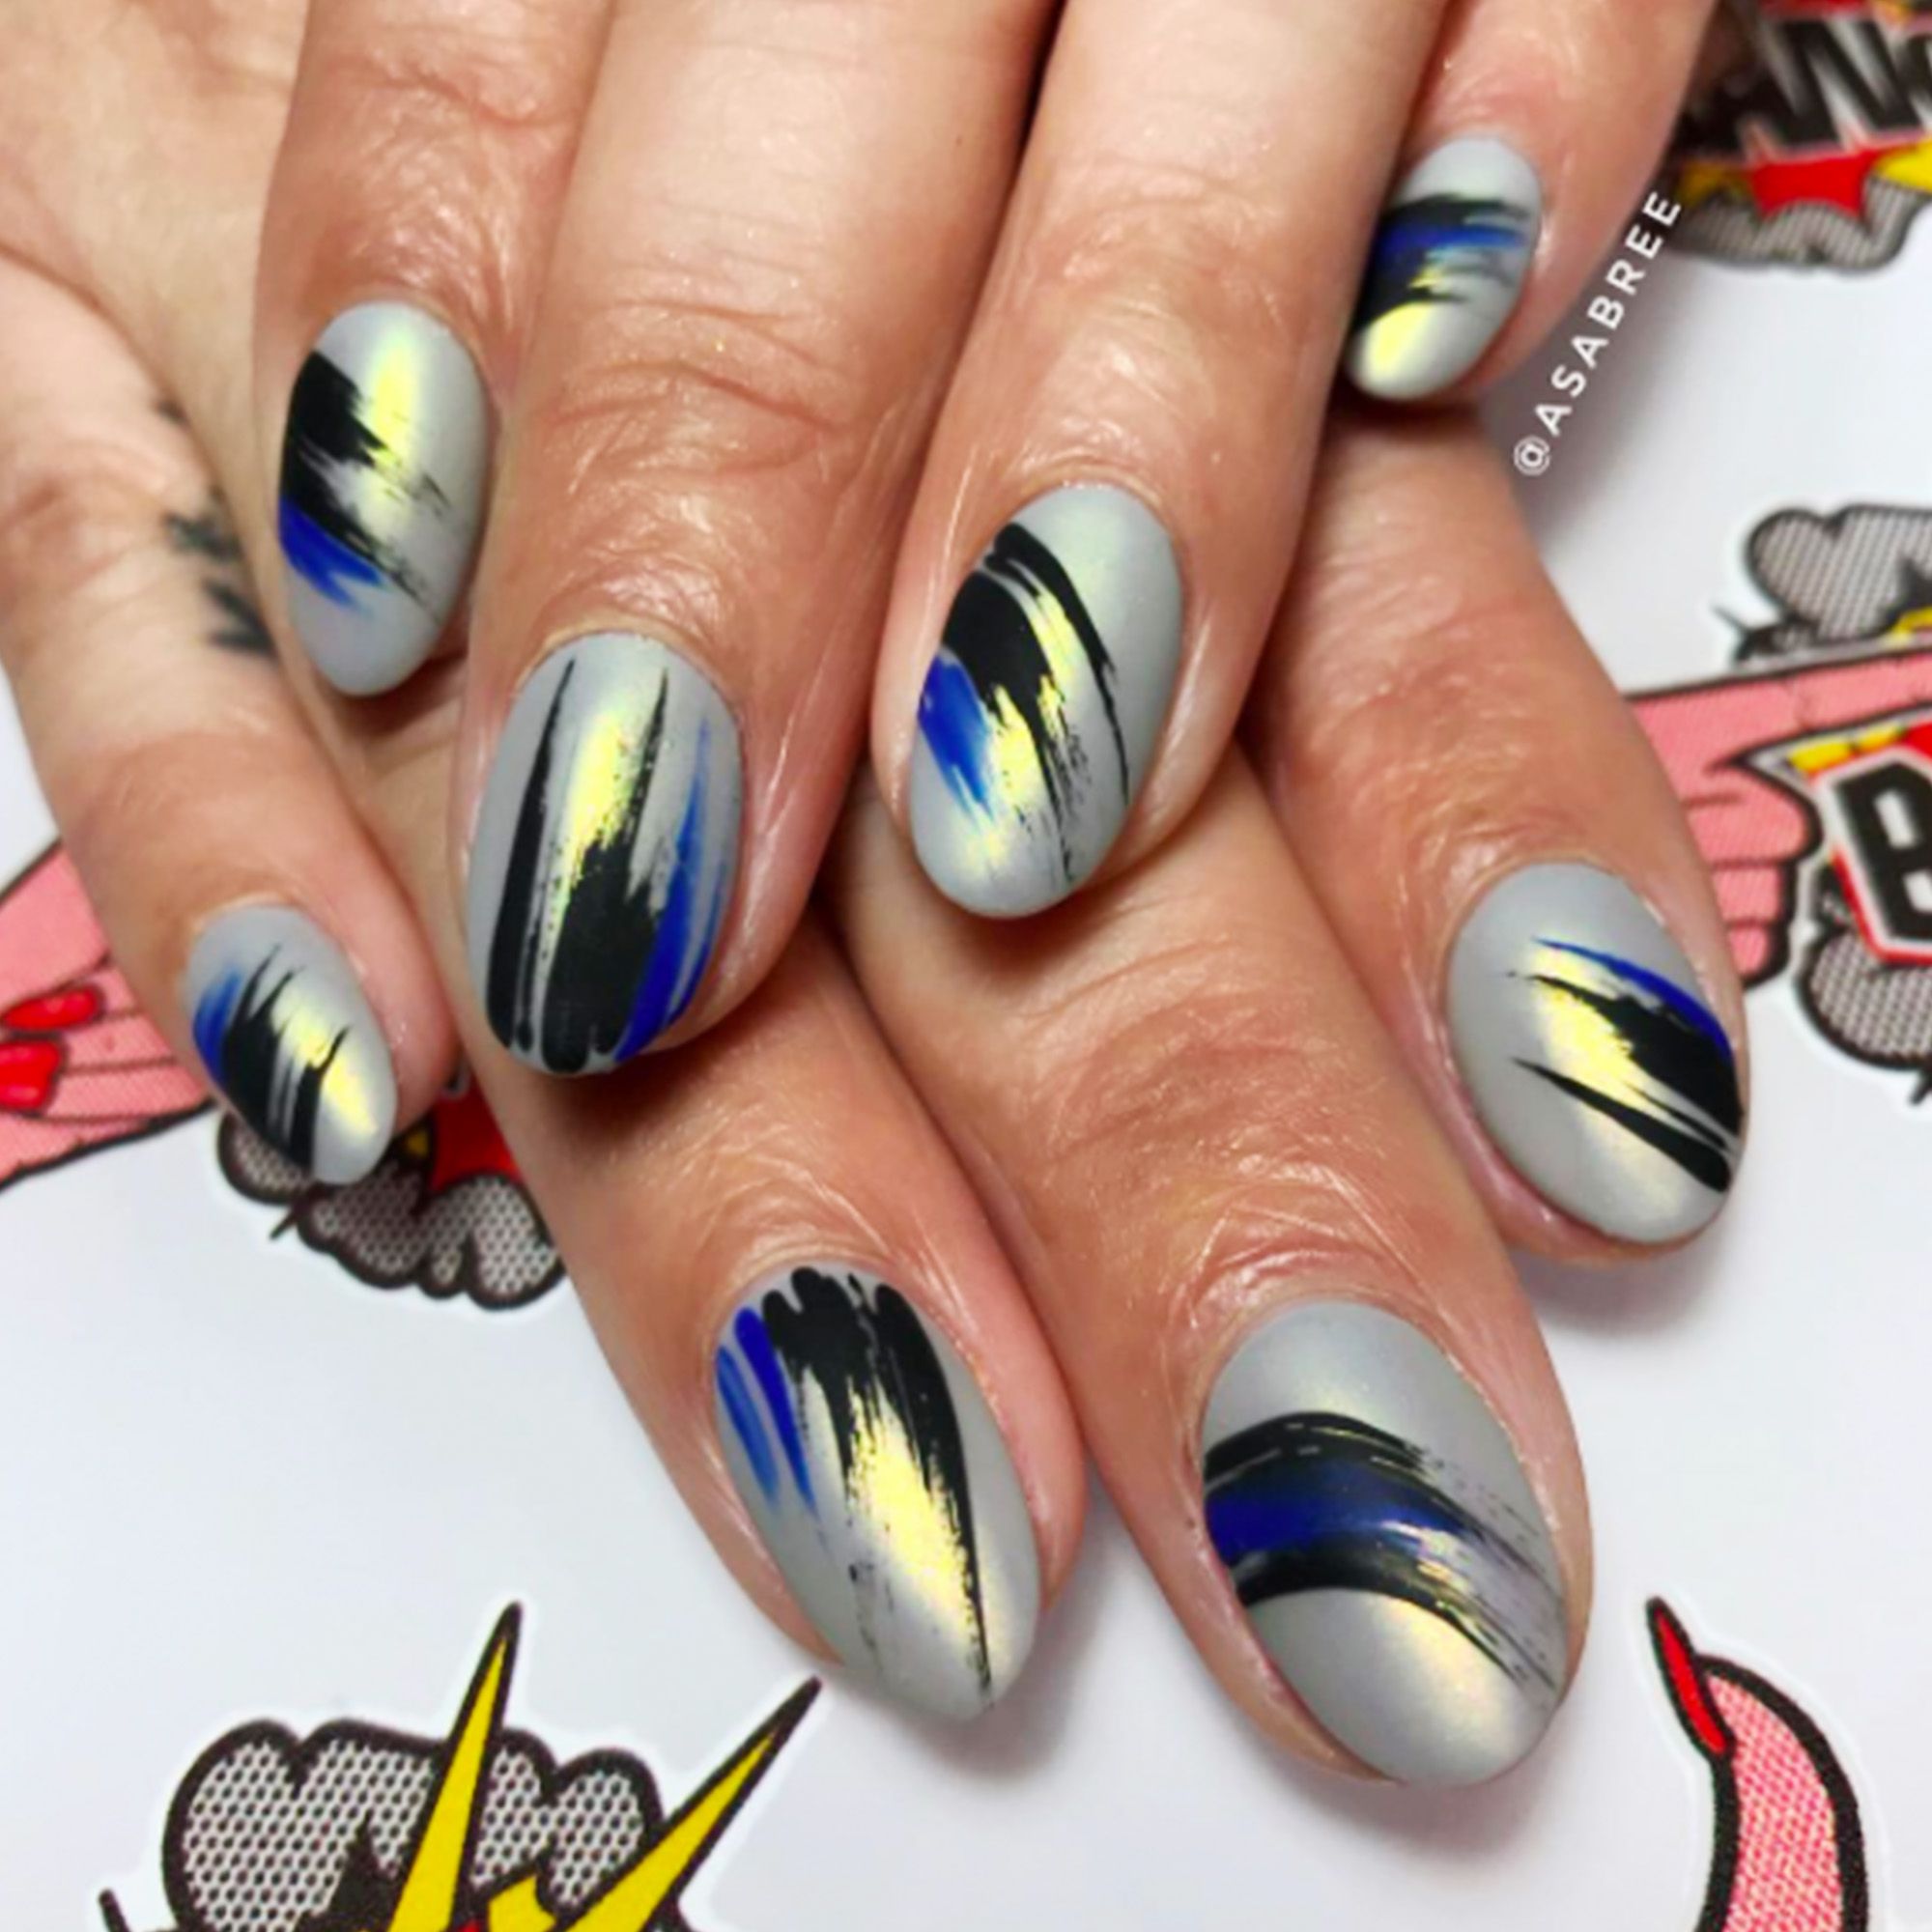 10 Summer nail inspo for your next outing | Times of India